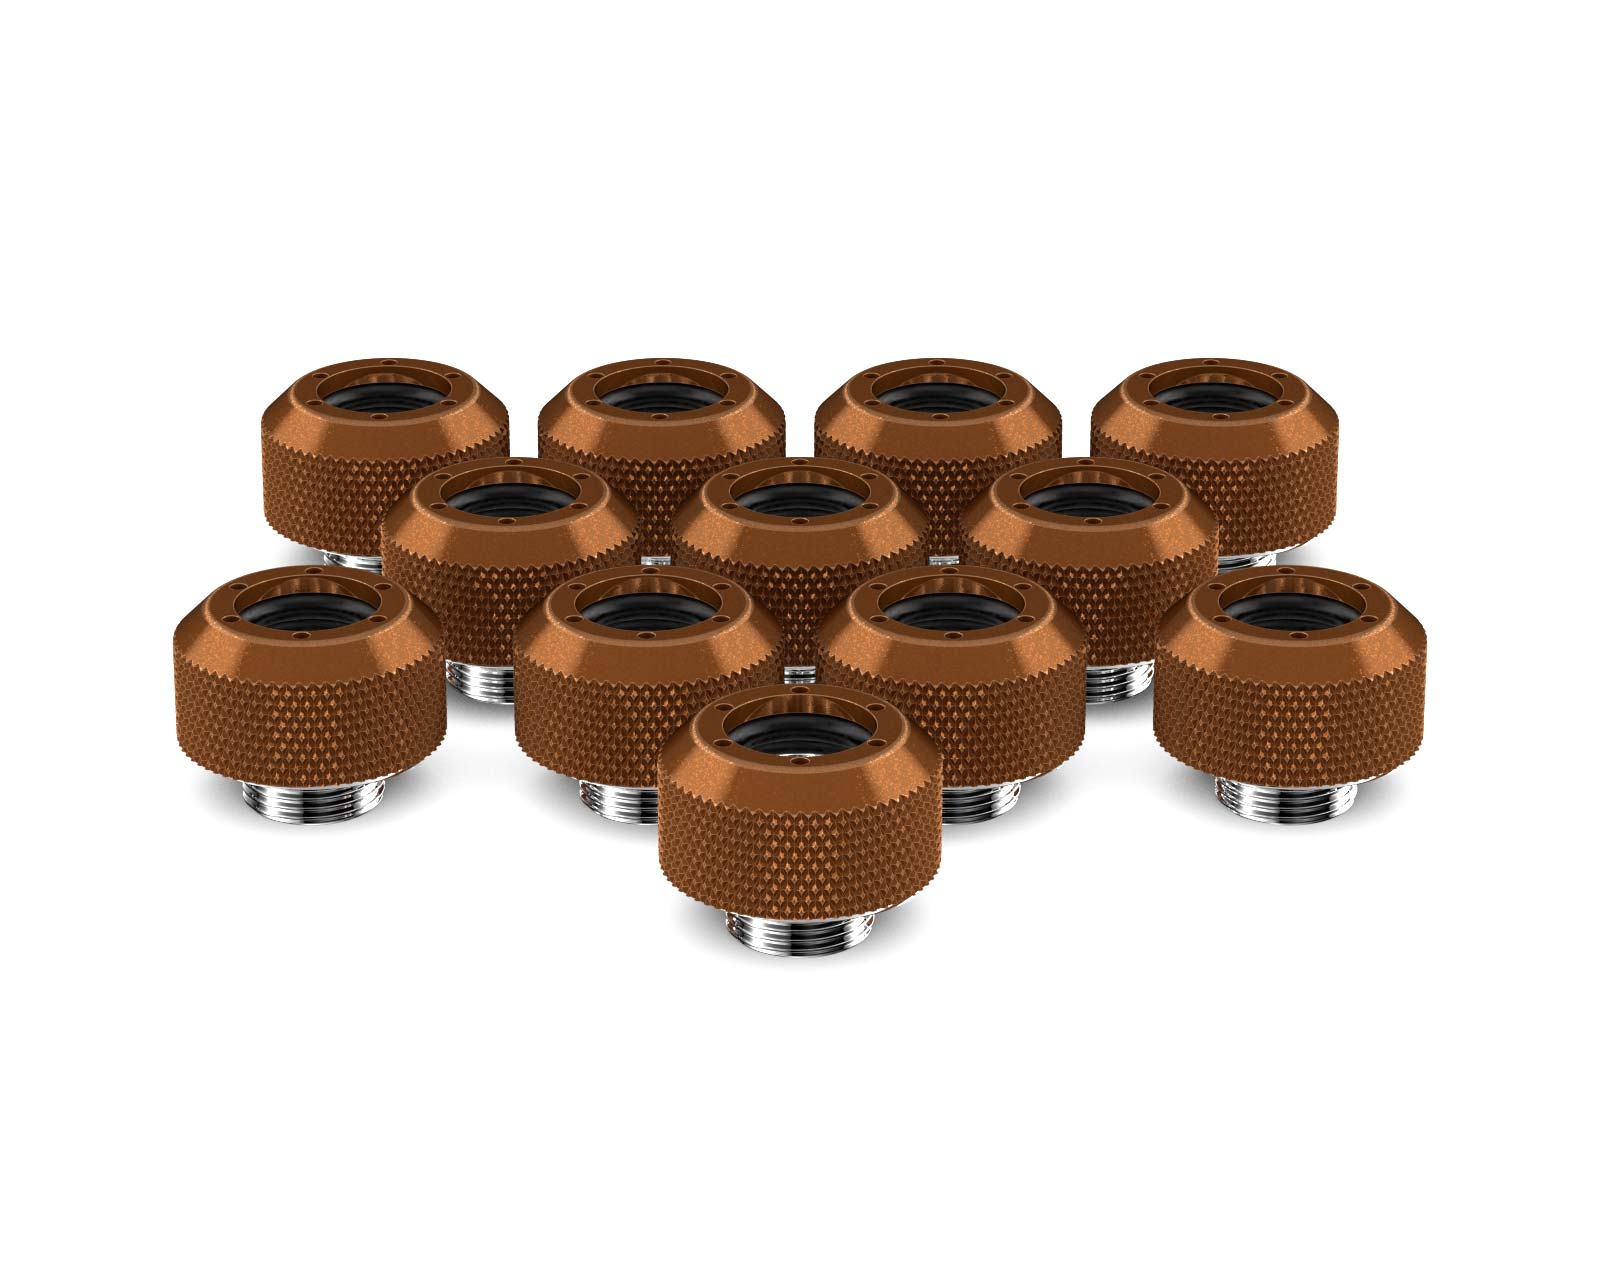 PrimoChill 1/2in. Rigid RevolverSX Series Fitting - 12 pack - PrimoChill - KEEPING IT COOL Copper